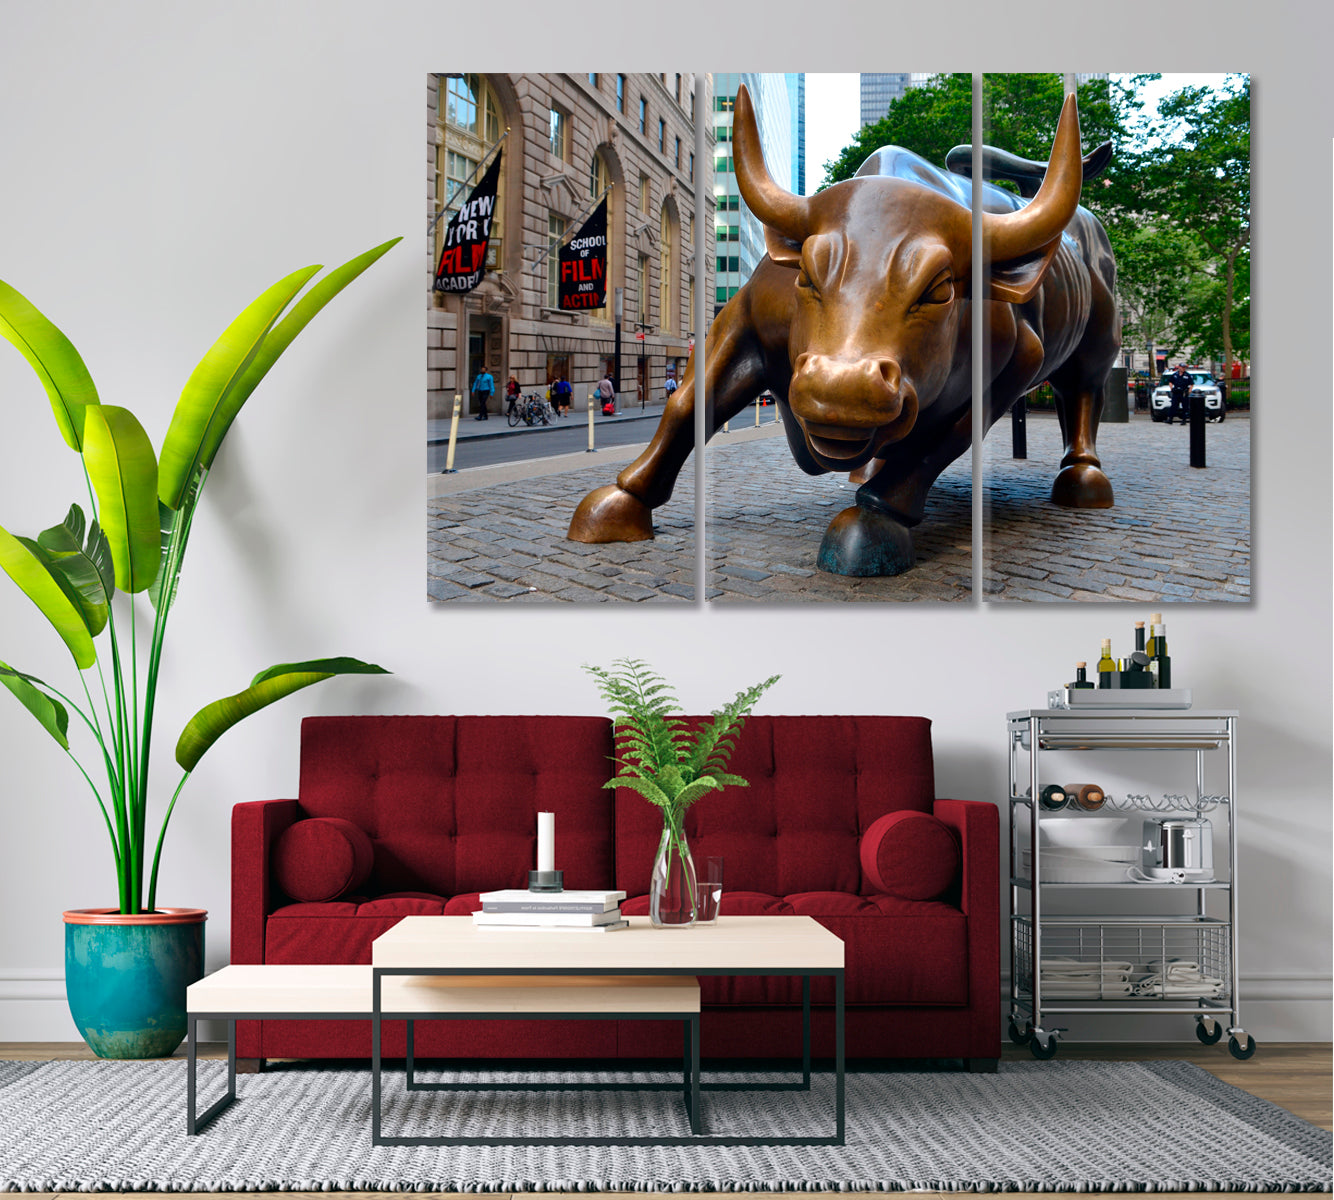 Wall Street Charging Bull Sculpture Canvas Print ArtLexy 3 Panels 36"x24" inches 